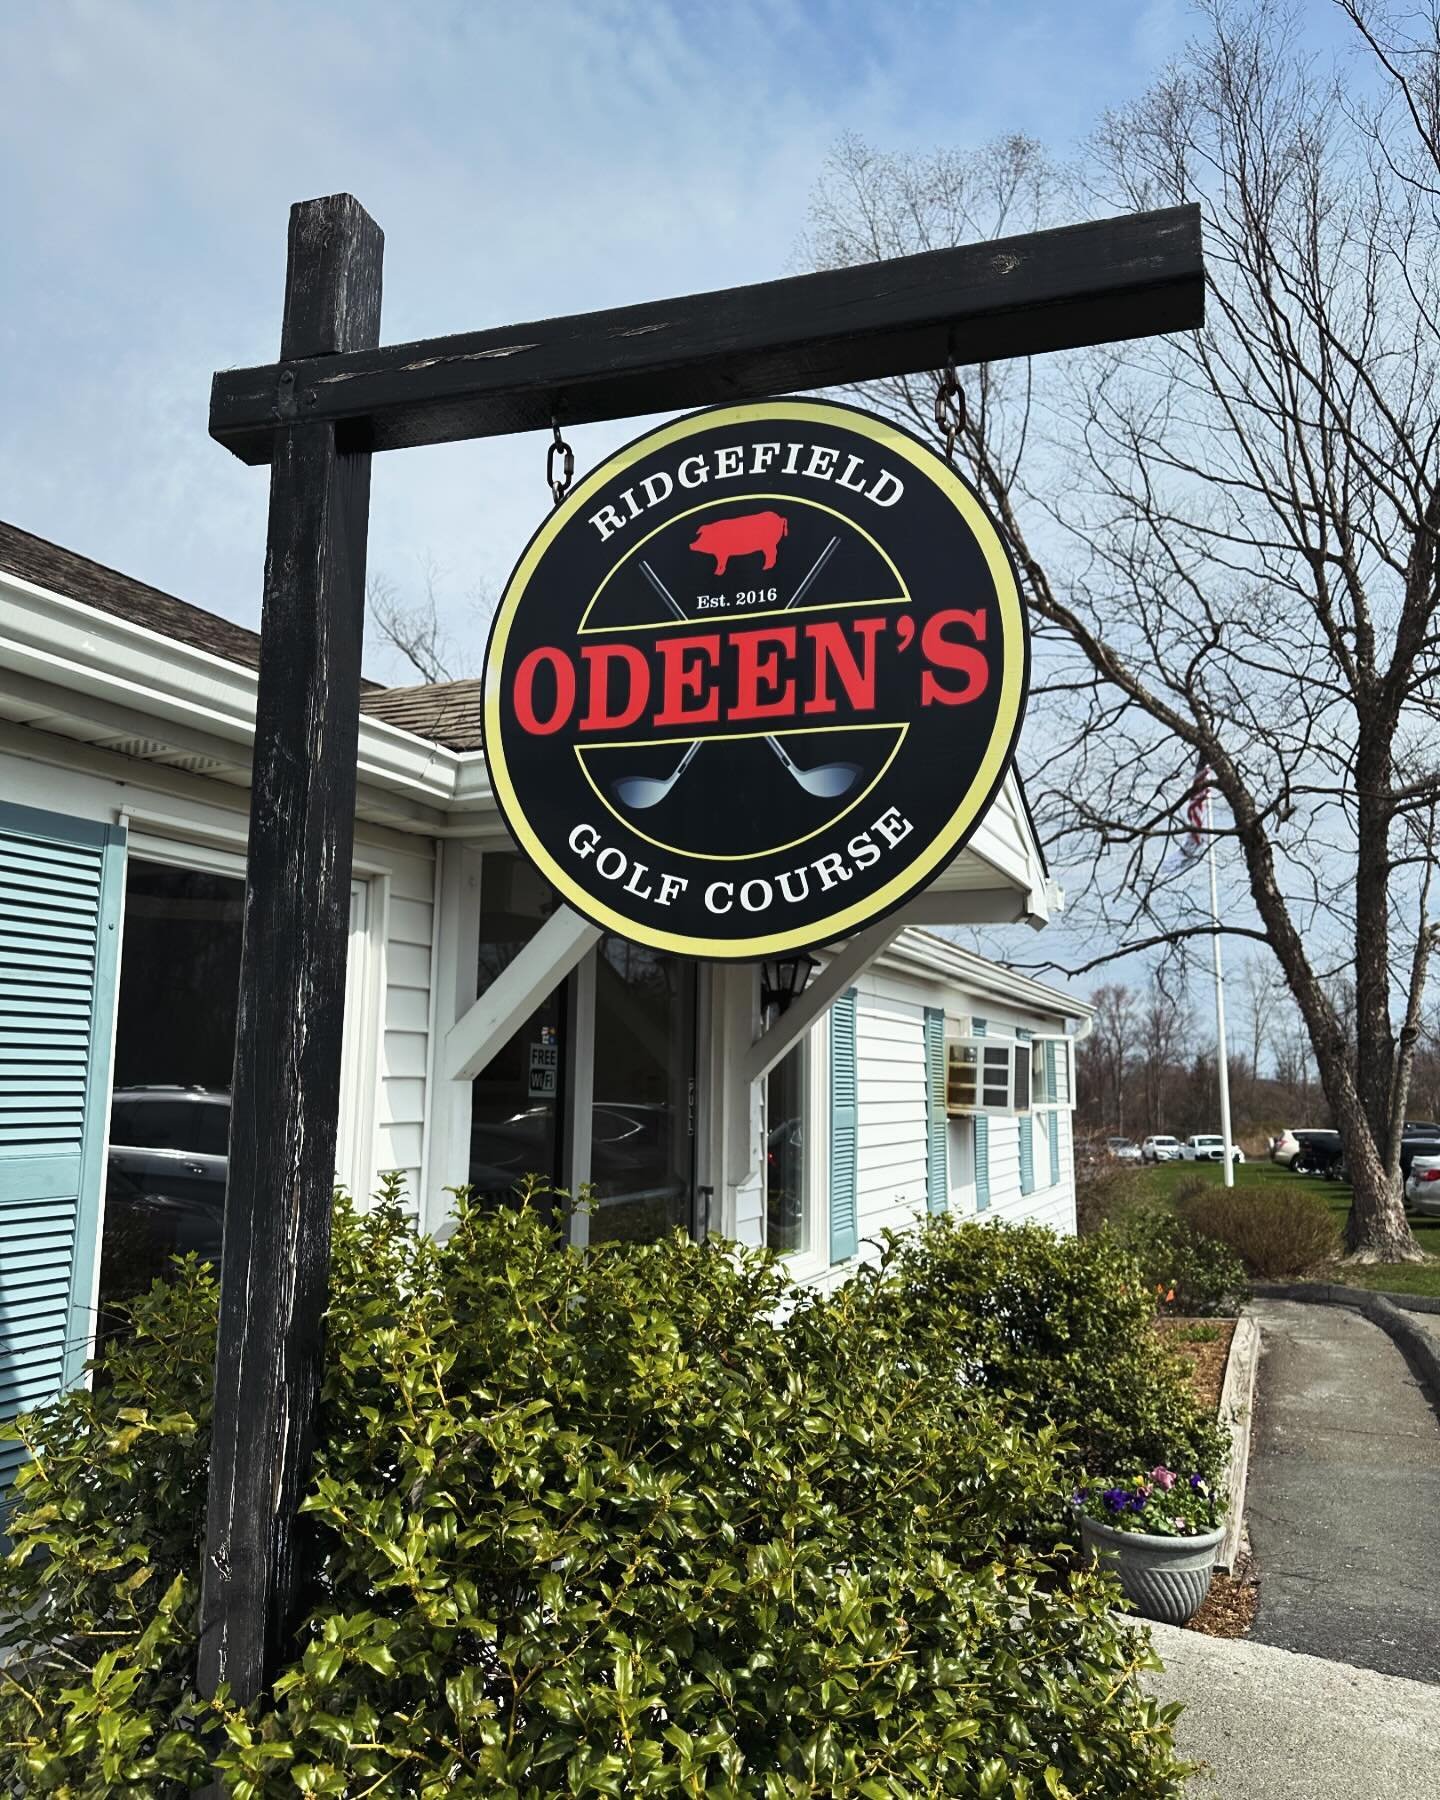 We're back! Who's ready for BBQ &amp; golf season? 🏌️🍗

Open now for lunch and dinner at @odeensbbq_at_rgc 

You don't have to be a golfer to dine with us 😉

#odeensbbq_at_rgc #ridgefieldgolfcourse #bbq #golfseason #odeensbbq #ridgefieldct